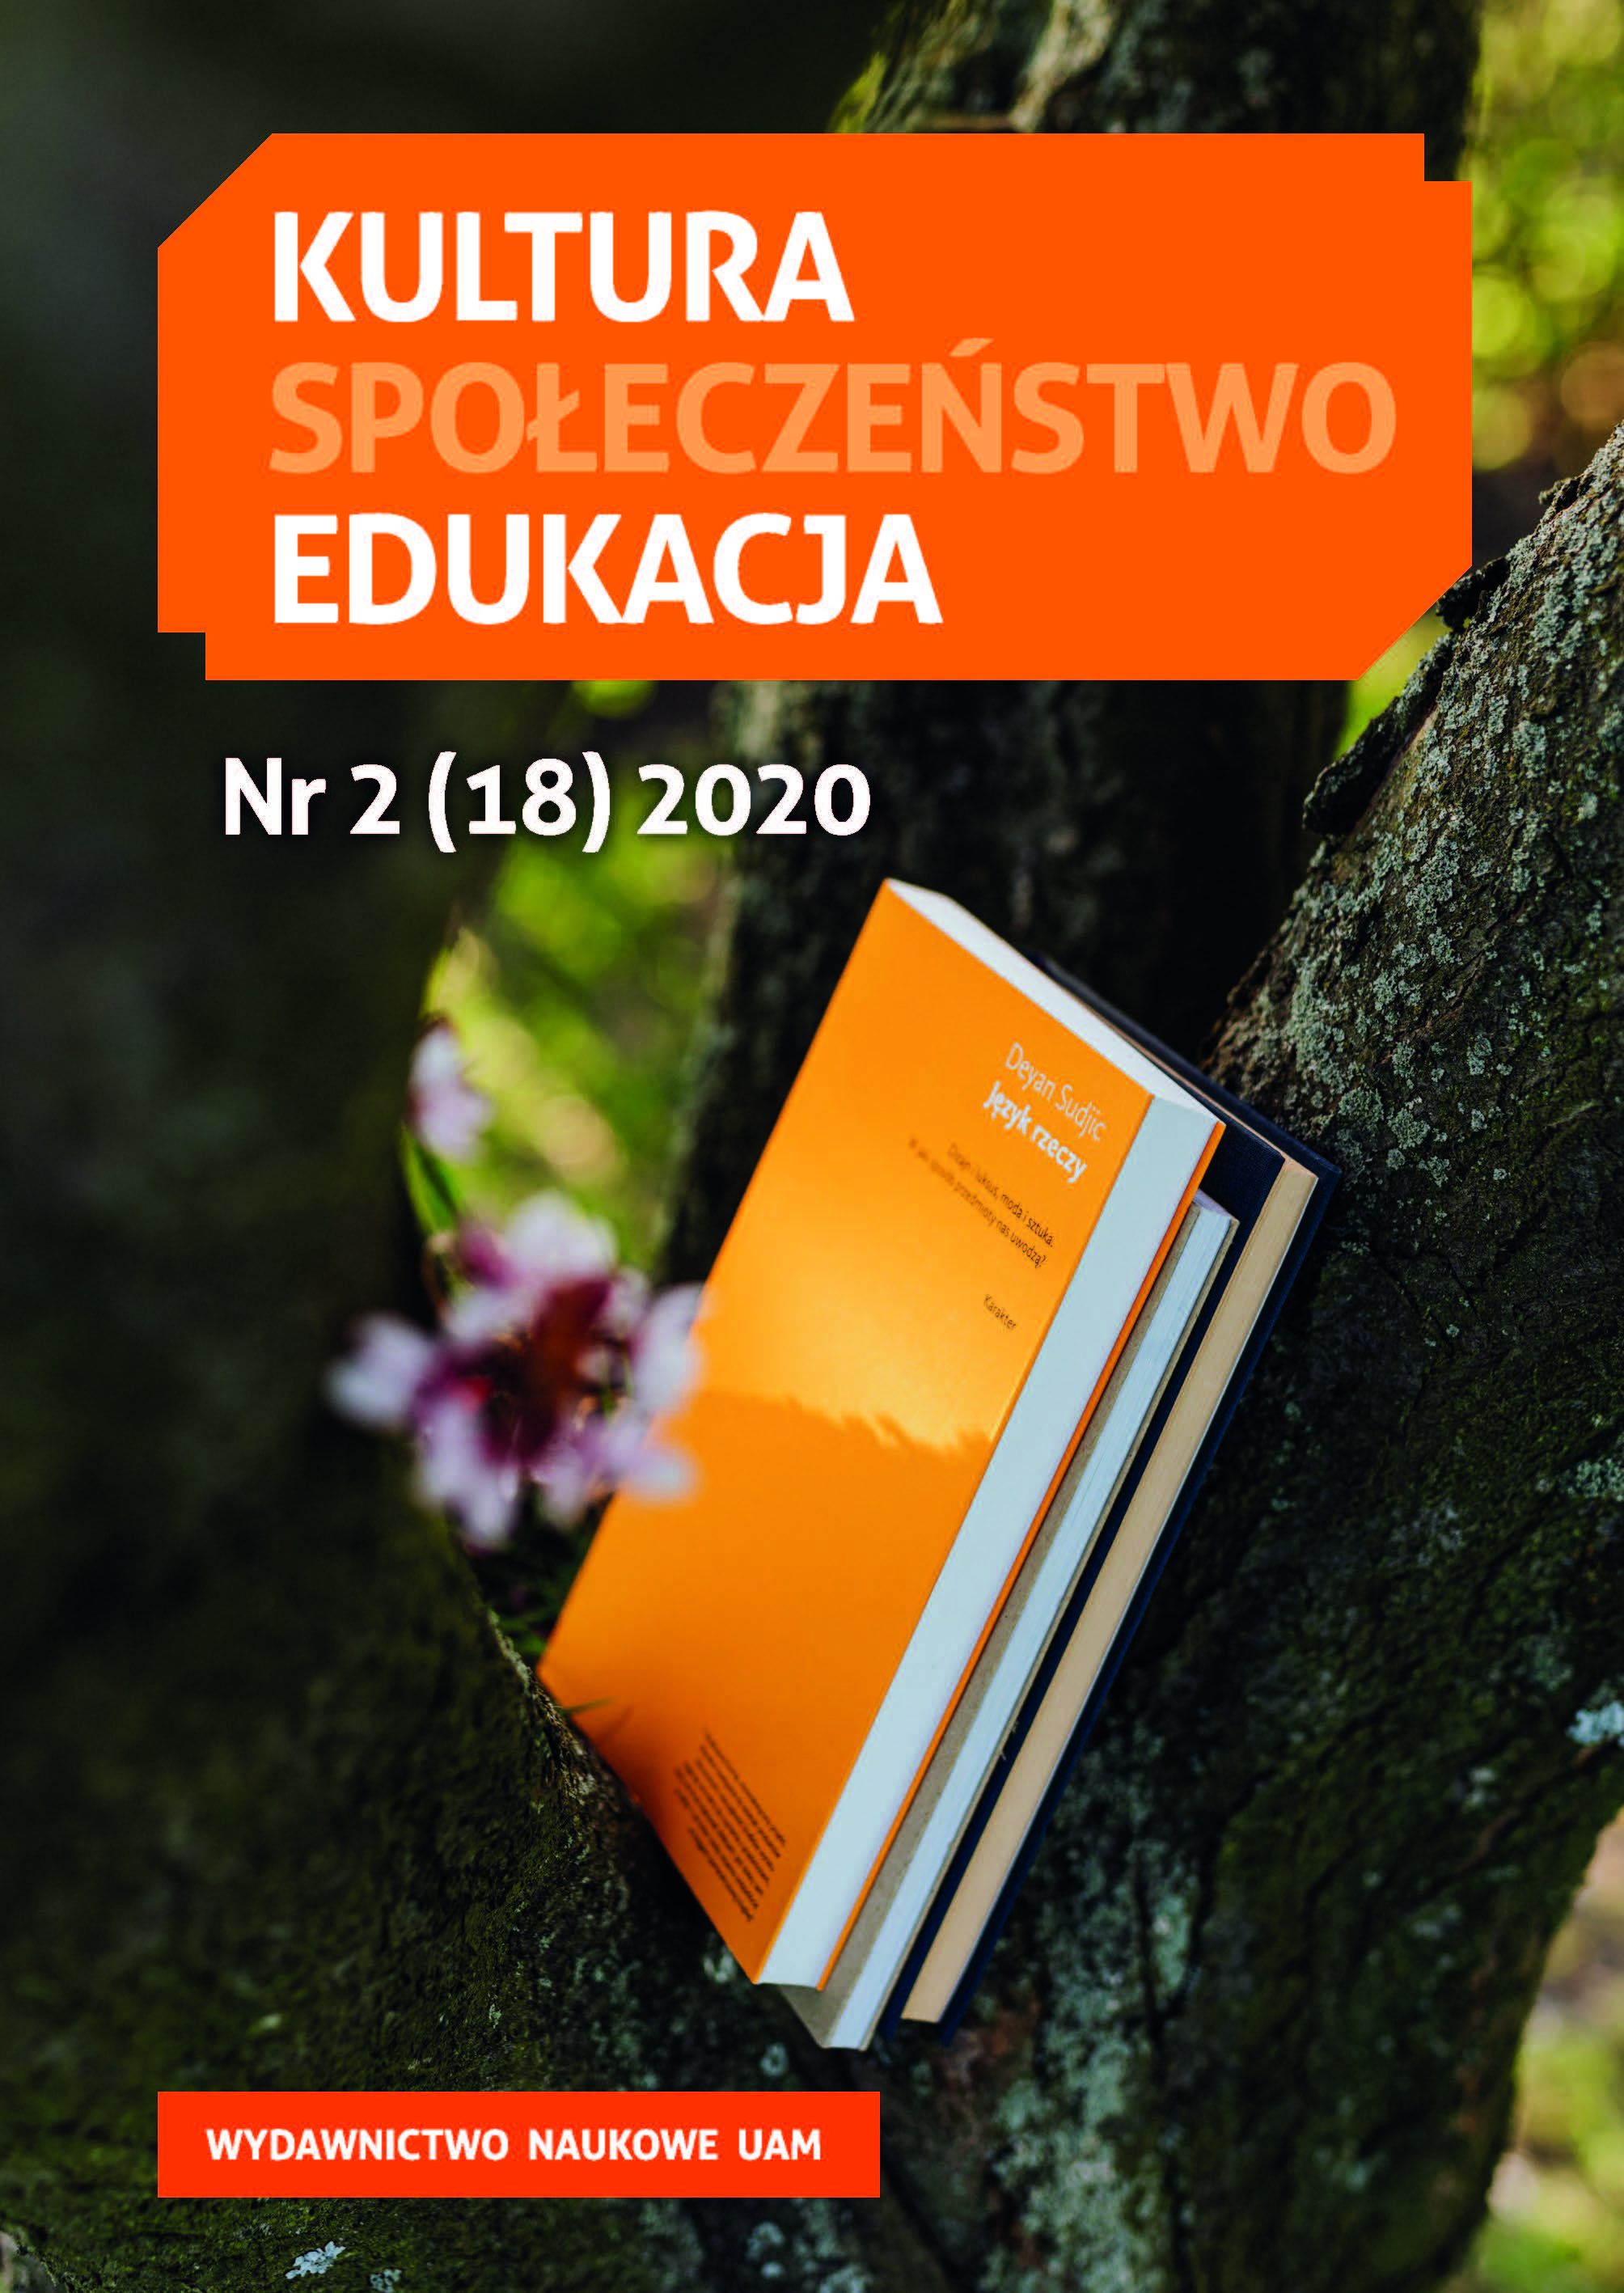 Political choices during the European
Parliament elections as a model for civic
responsibility of young people in Poland –
the context of formal education Cover Image